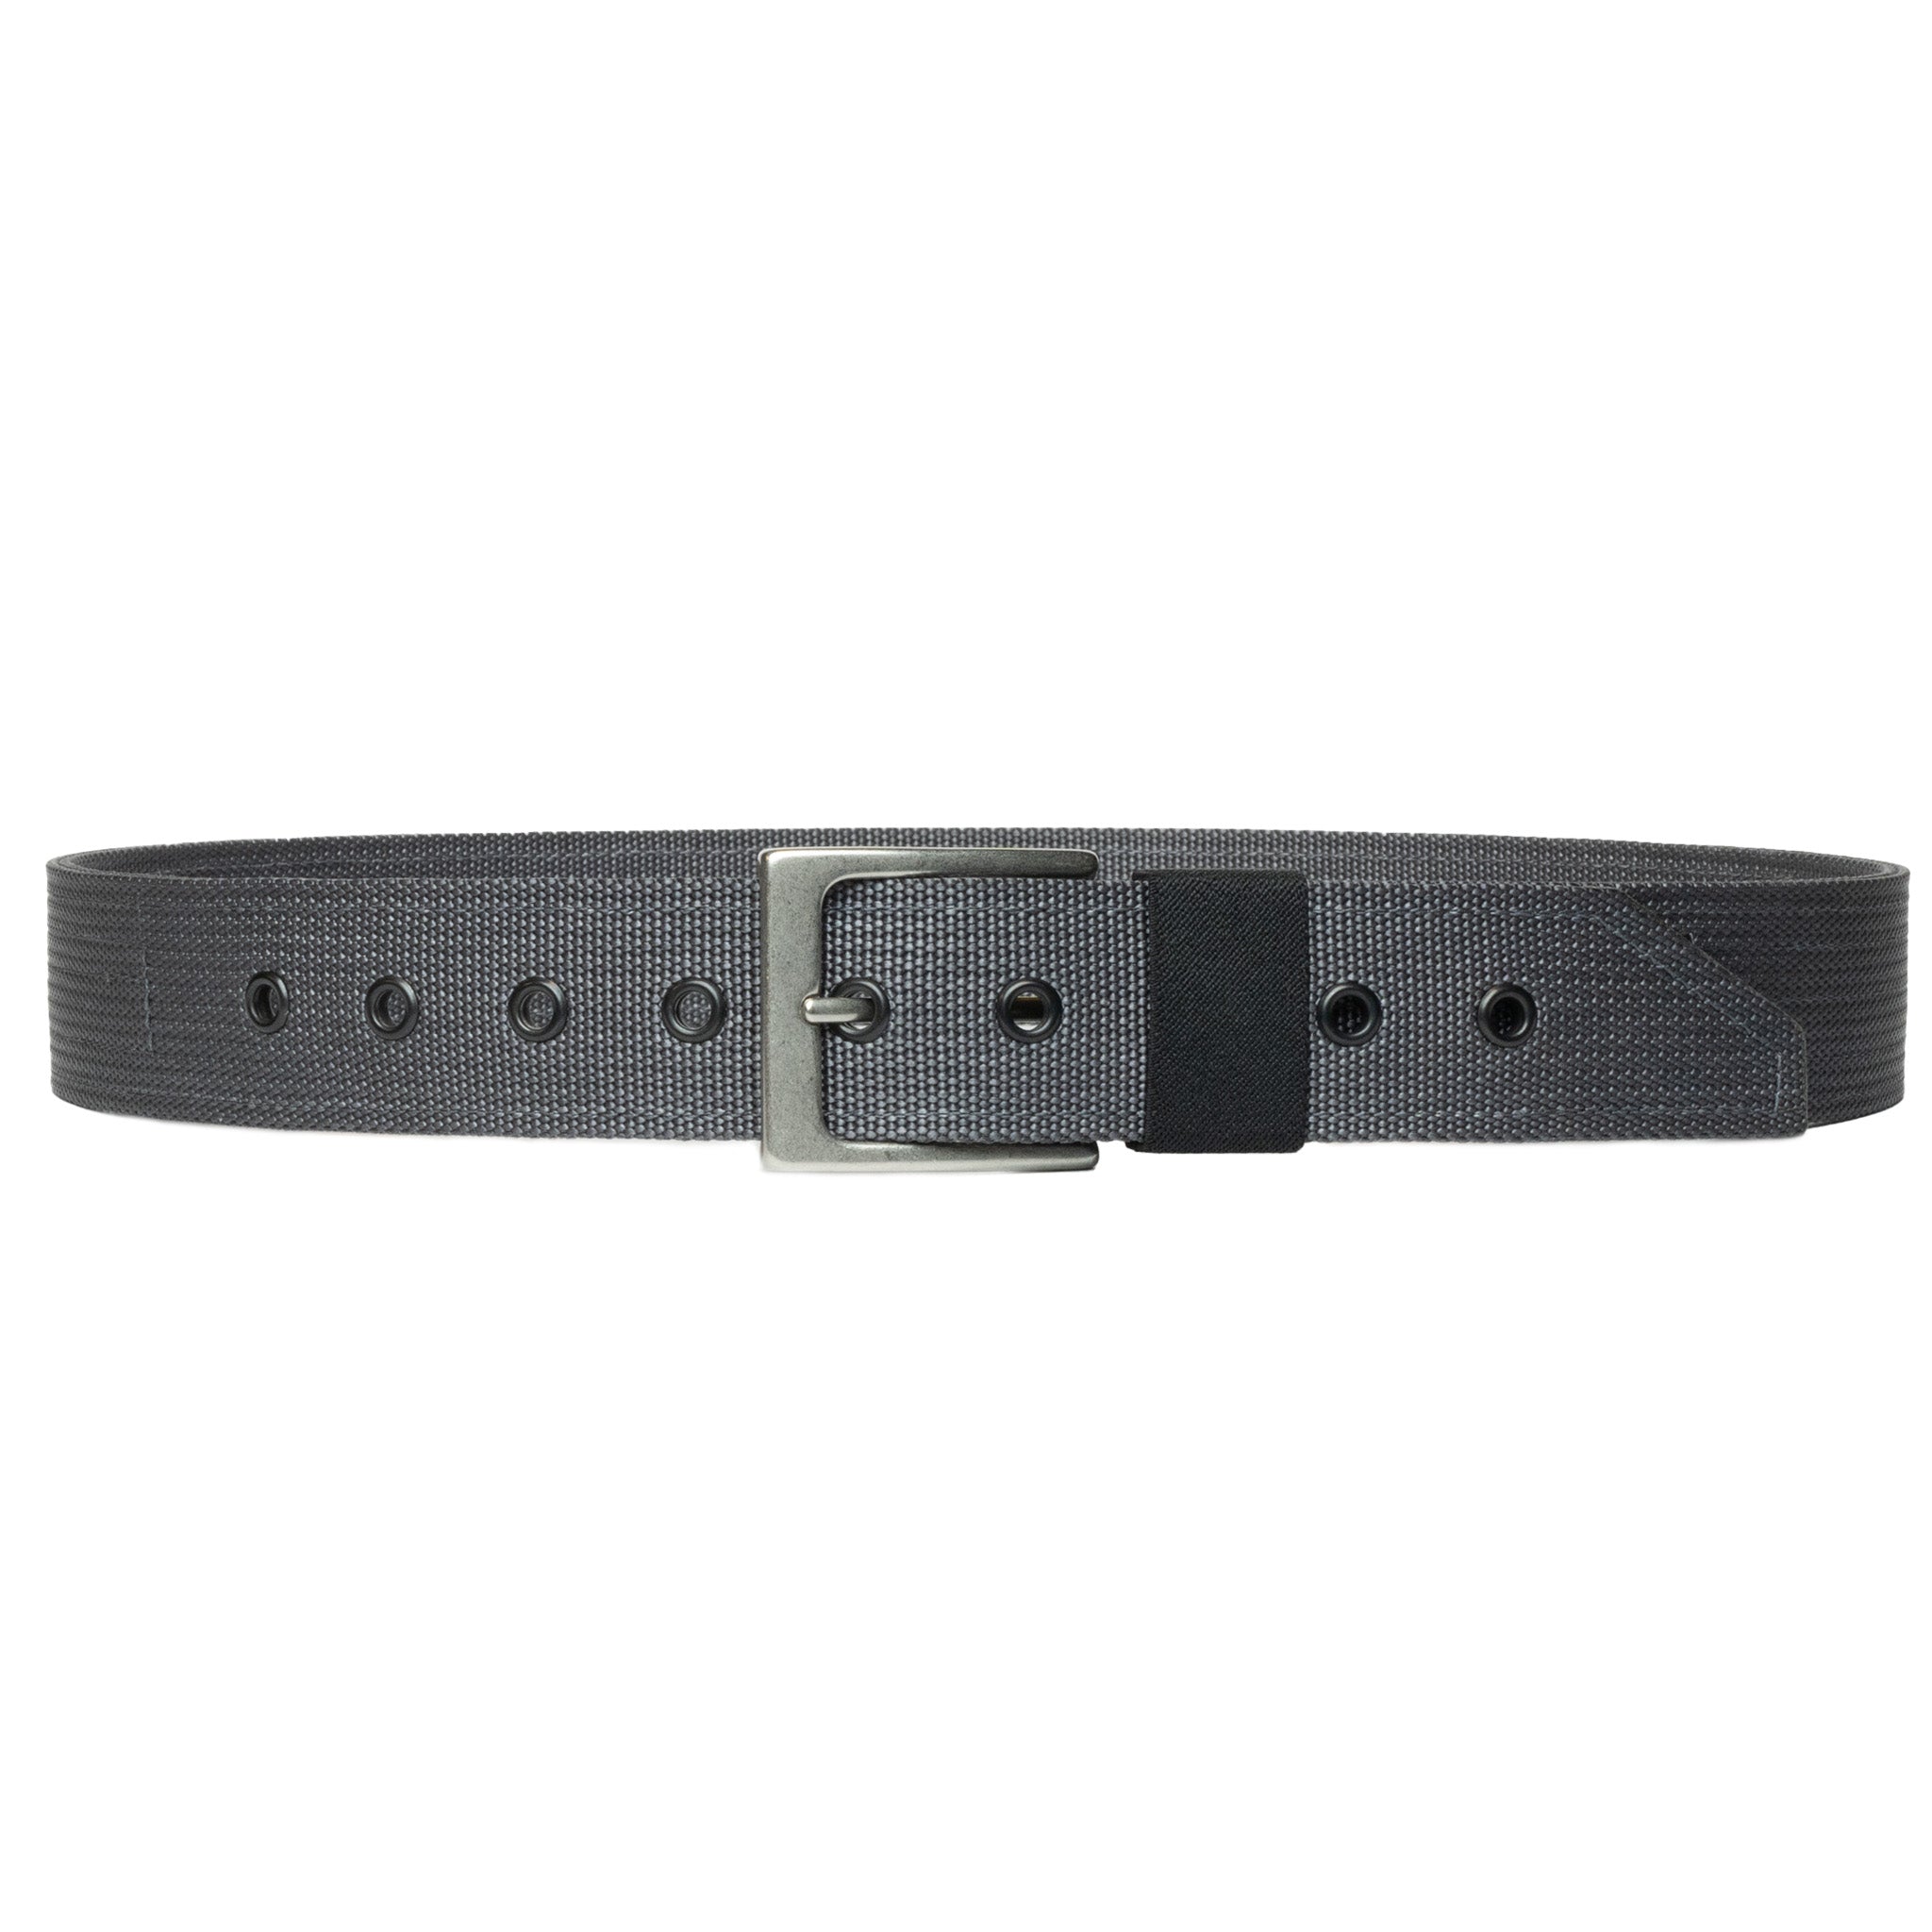 Emissary EDC Belt in Wolf Gray with Silver Buckle